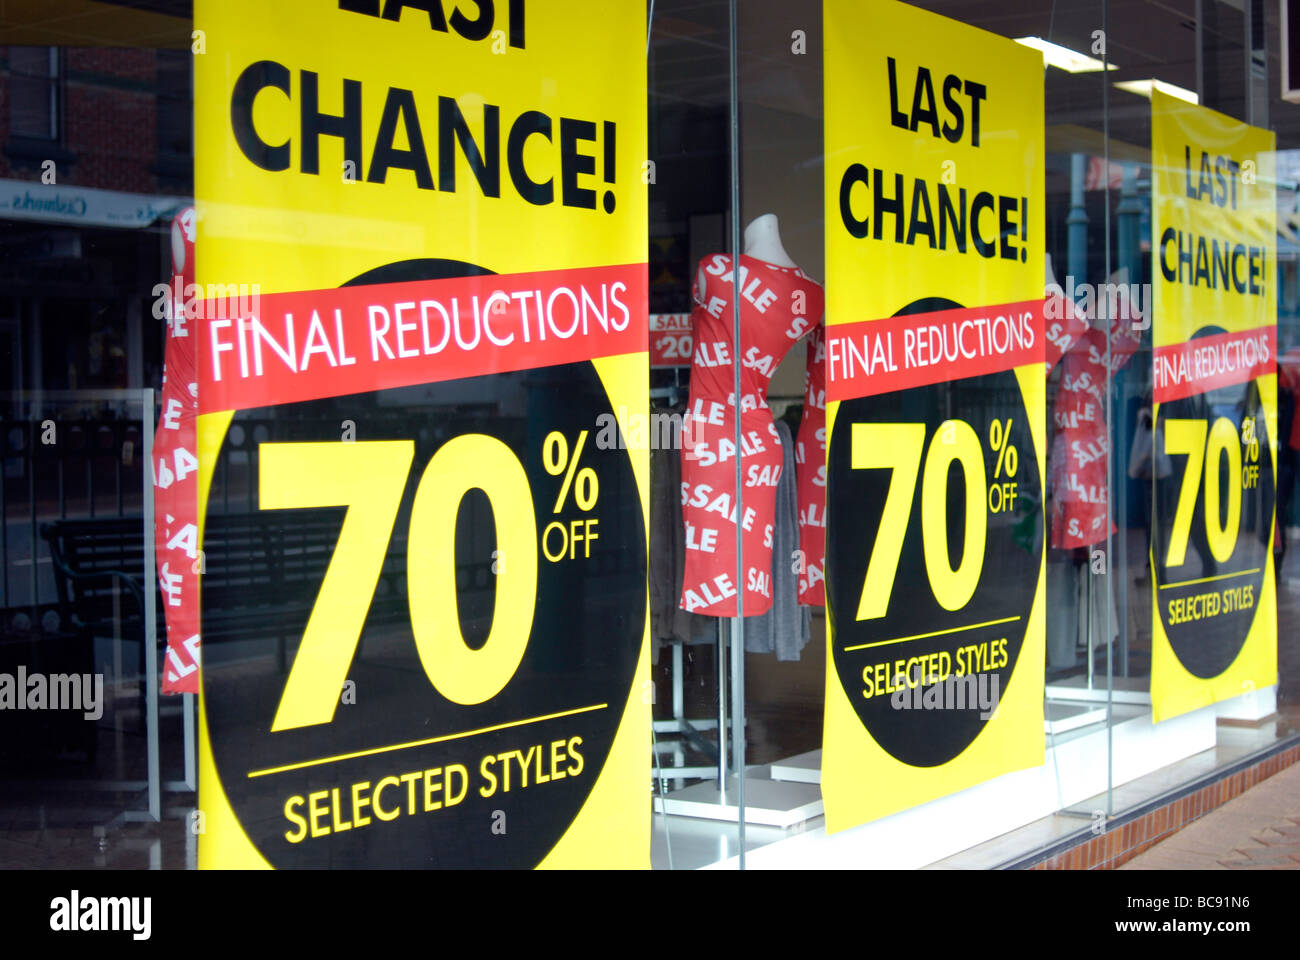 Final reductions closing down Sale sign in shop window Stock Photo